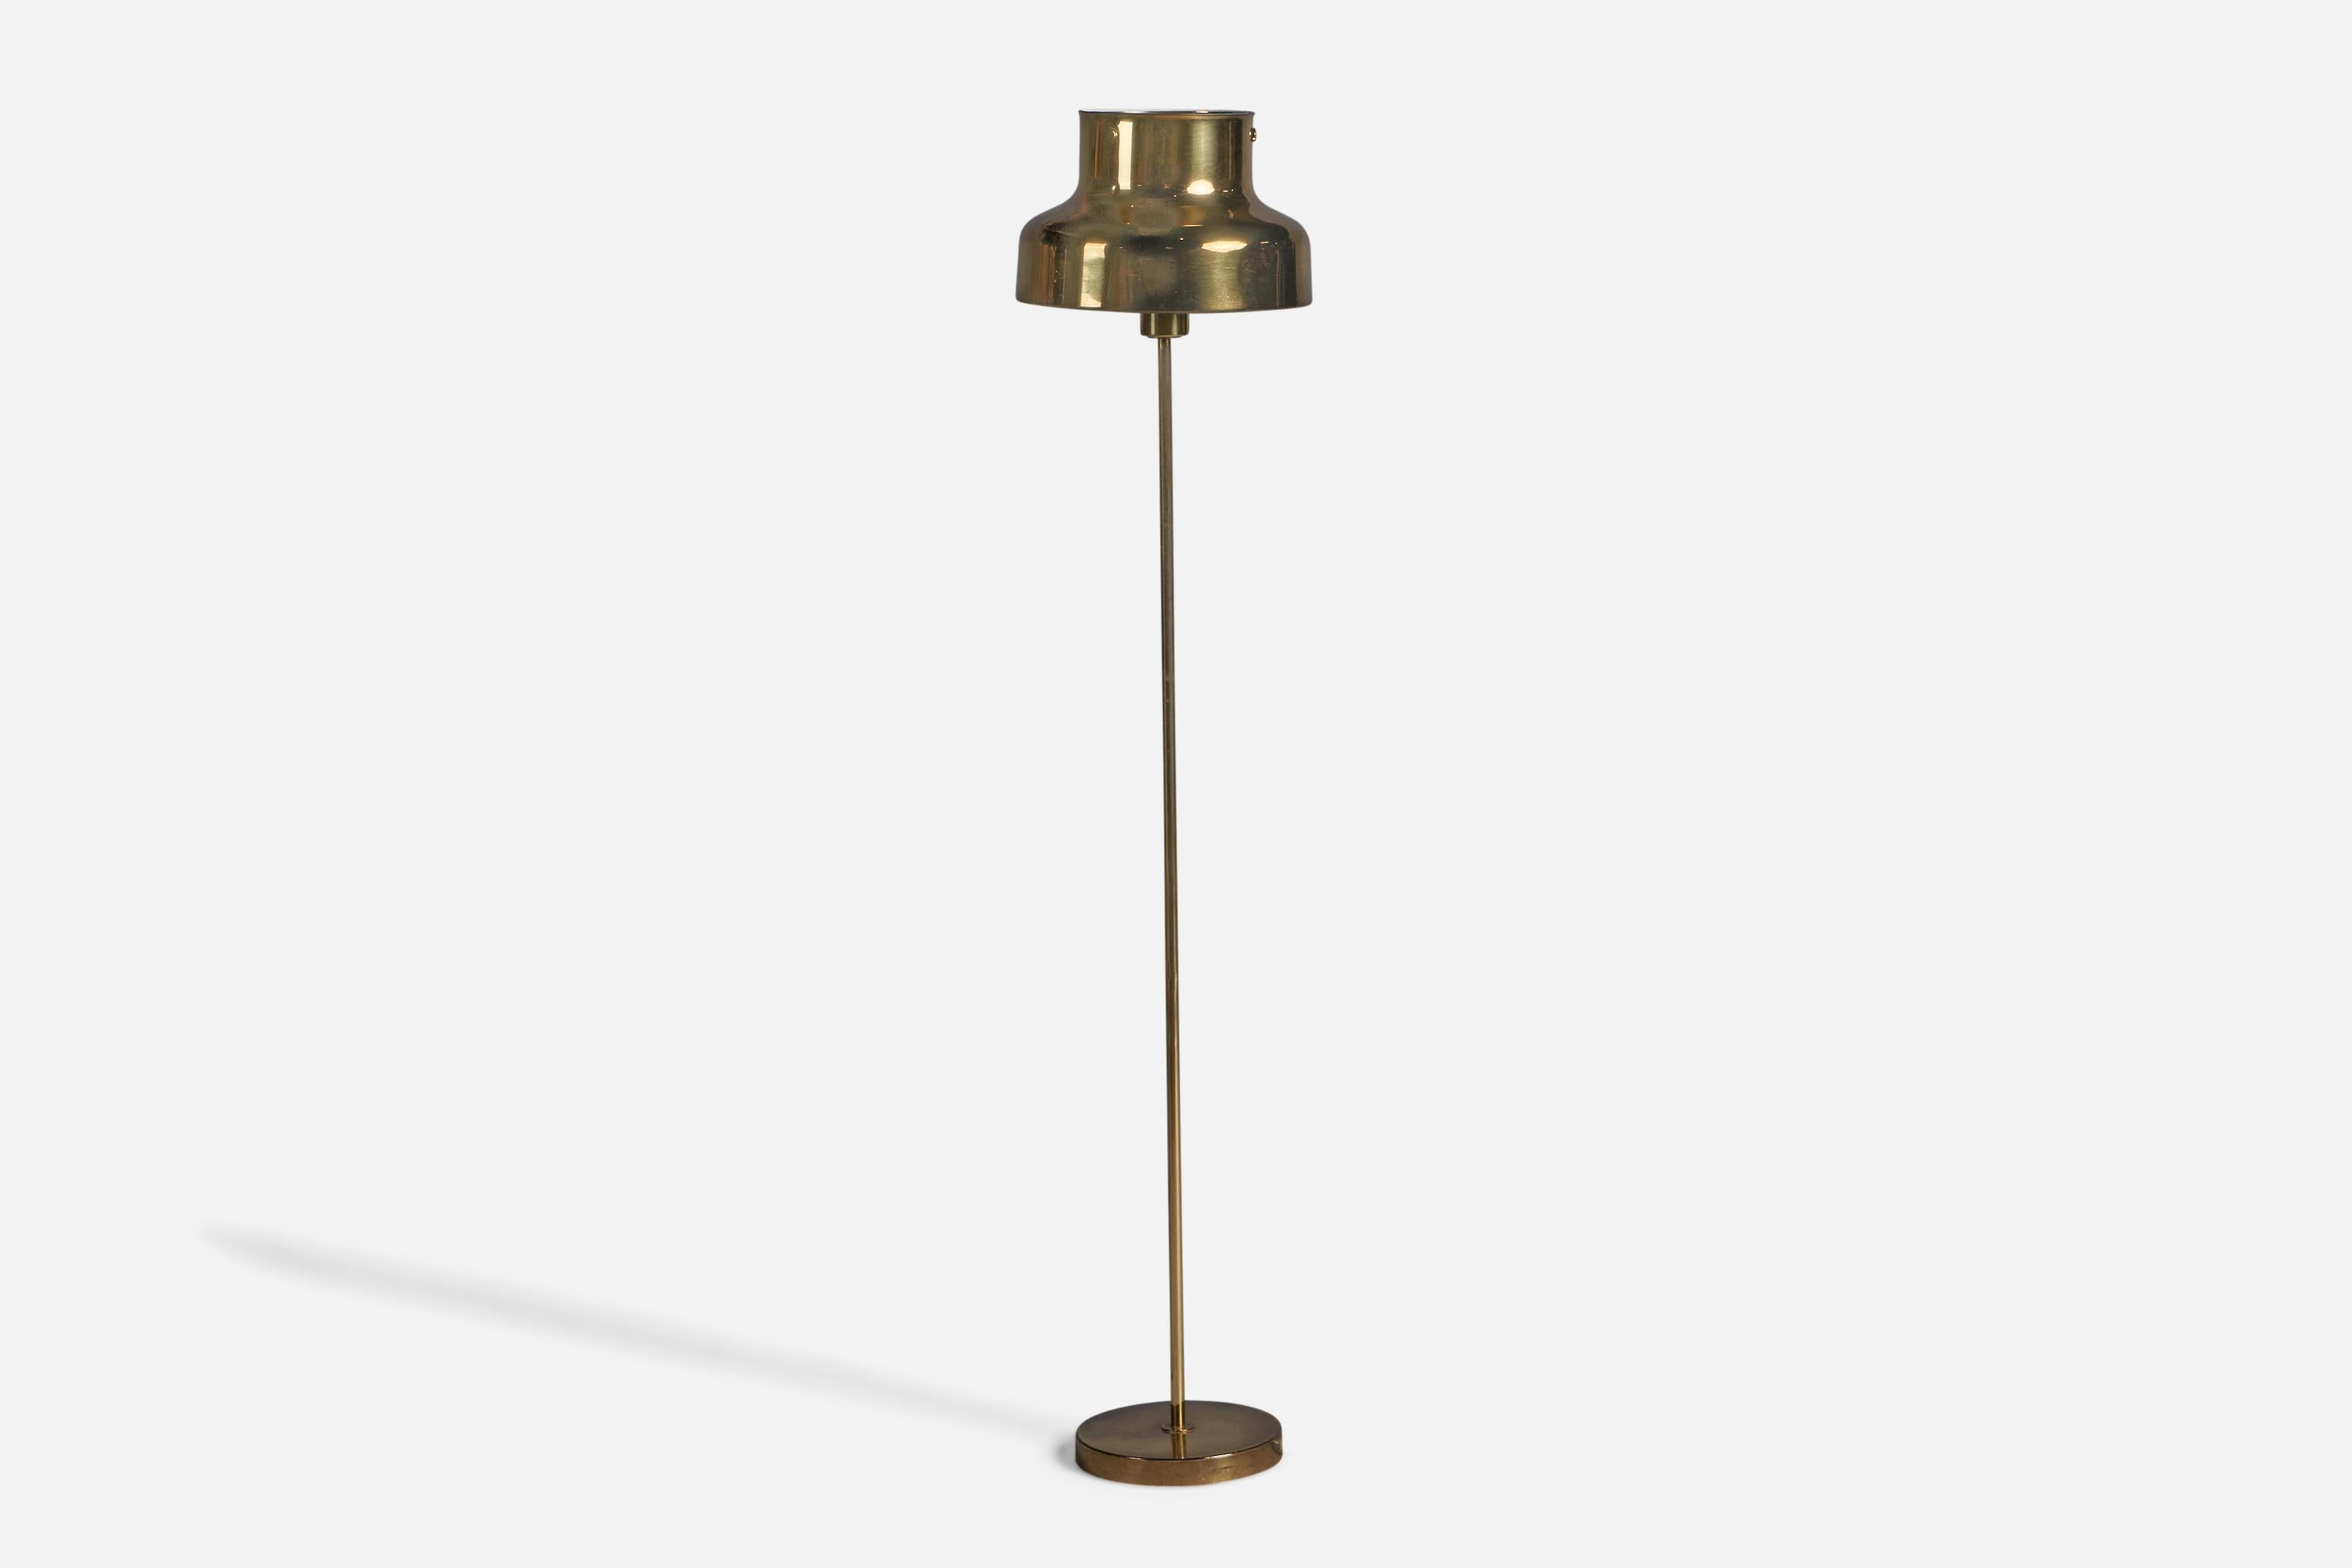 A brass floor lamp designed by Anders Pehrsson and produced by Atelje Lyktan, Sweden, c. 1960s.
Overall Dimensions (inches): 47.5